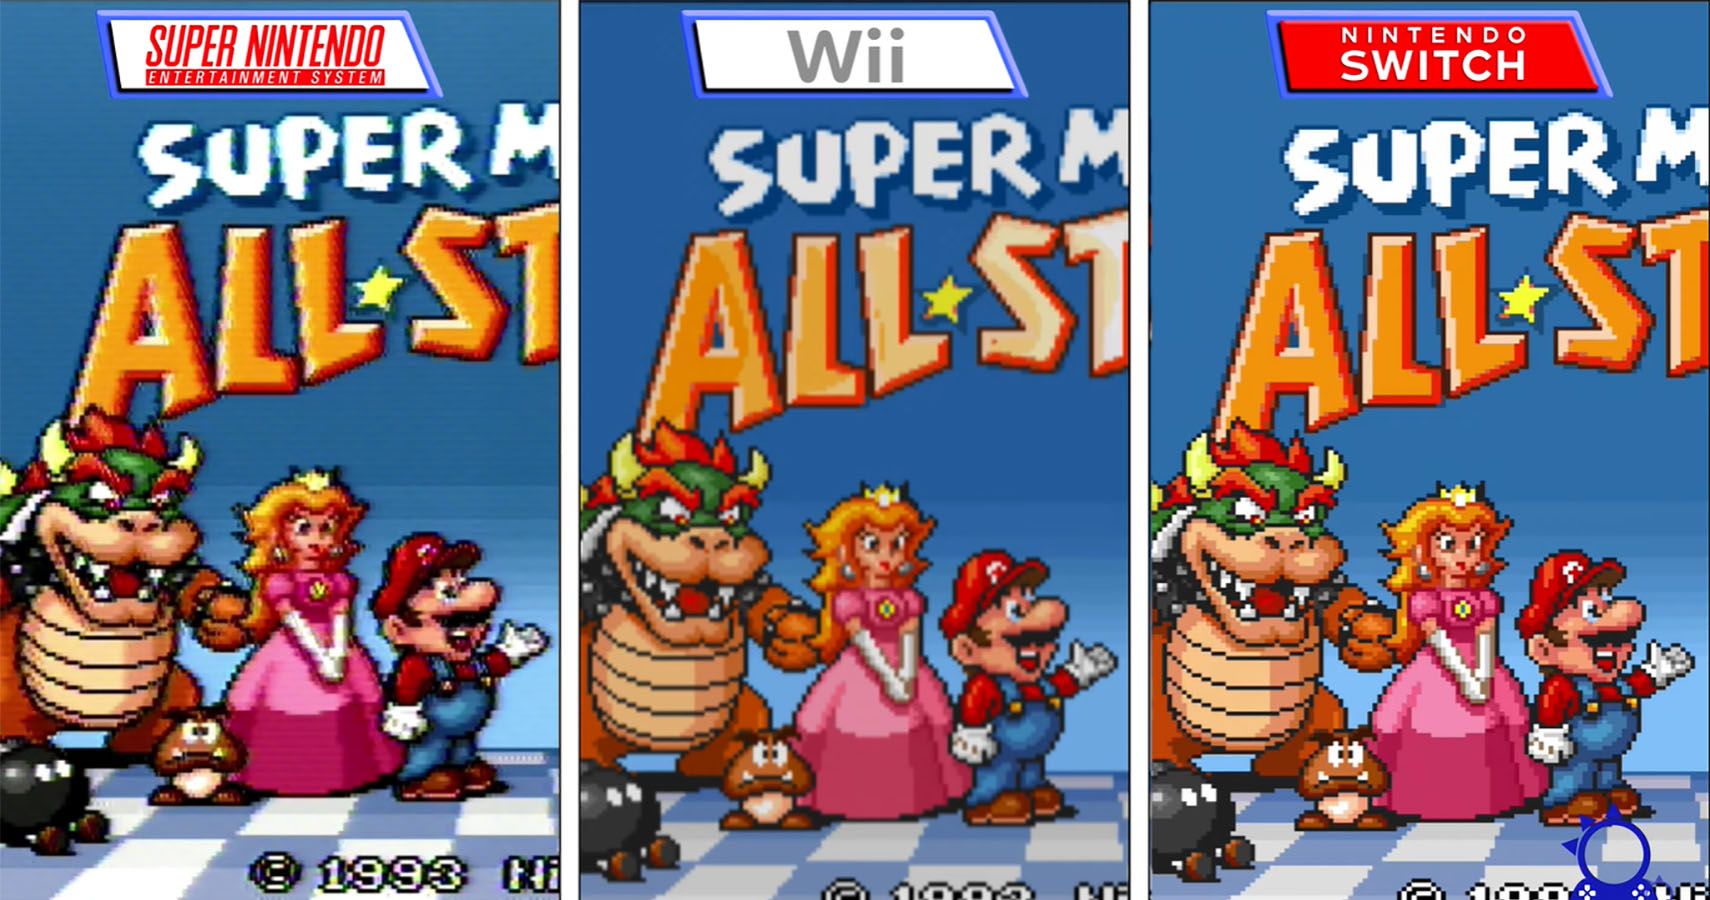 oficina postal Inspector Preservativo YouTuber Creates Side-By-Side Video Comparison Of Super Mario All-Stars on  SNES, Wii, & Switch